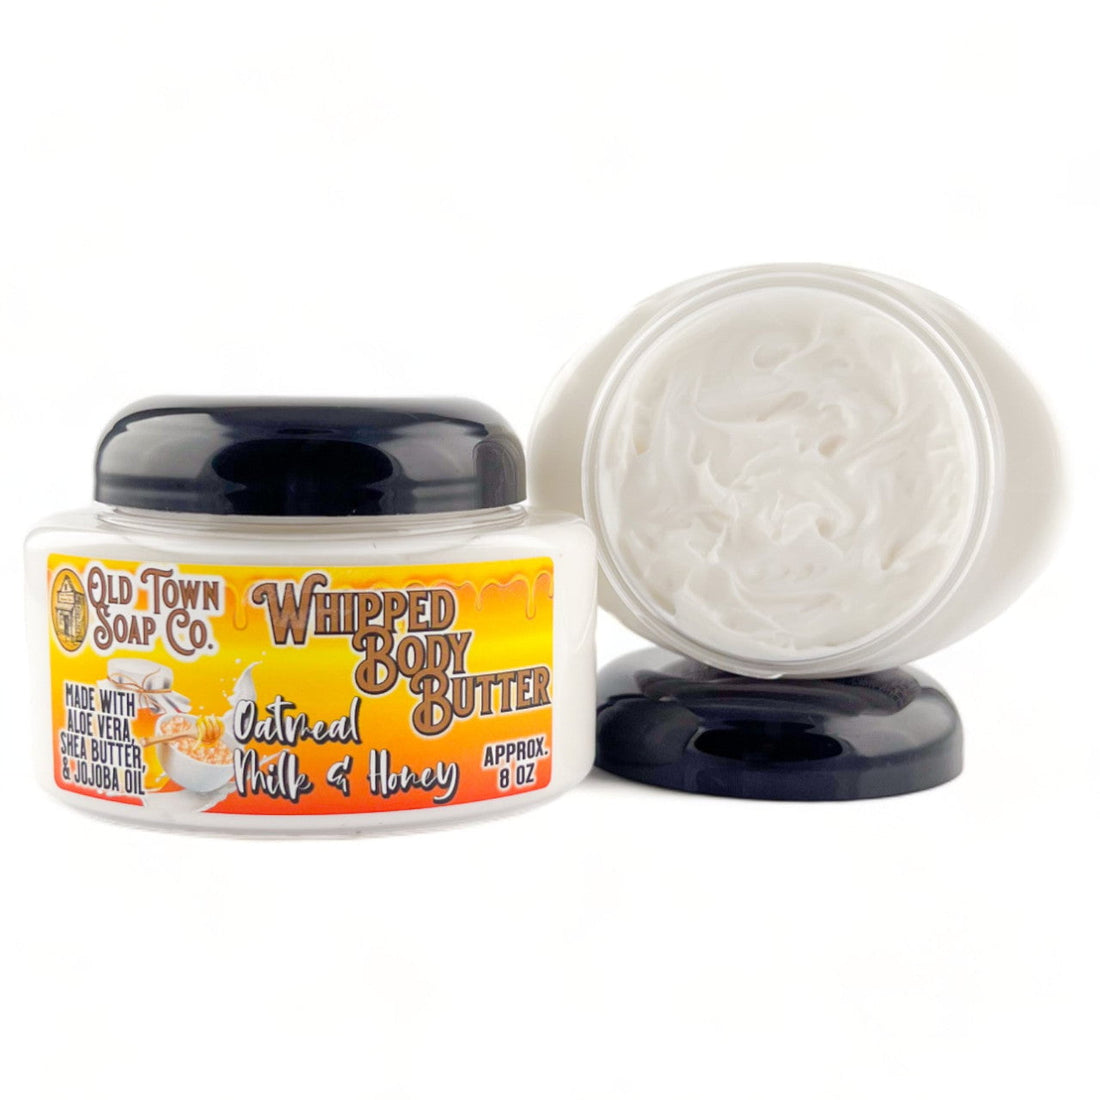 Oatmeal, Milk &amp; Honey -Whipped Body Butter - Old Town Soap Co.